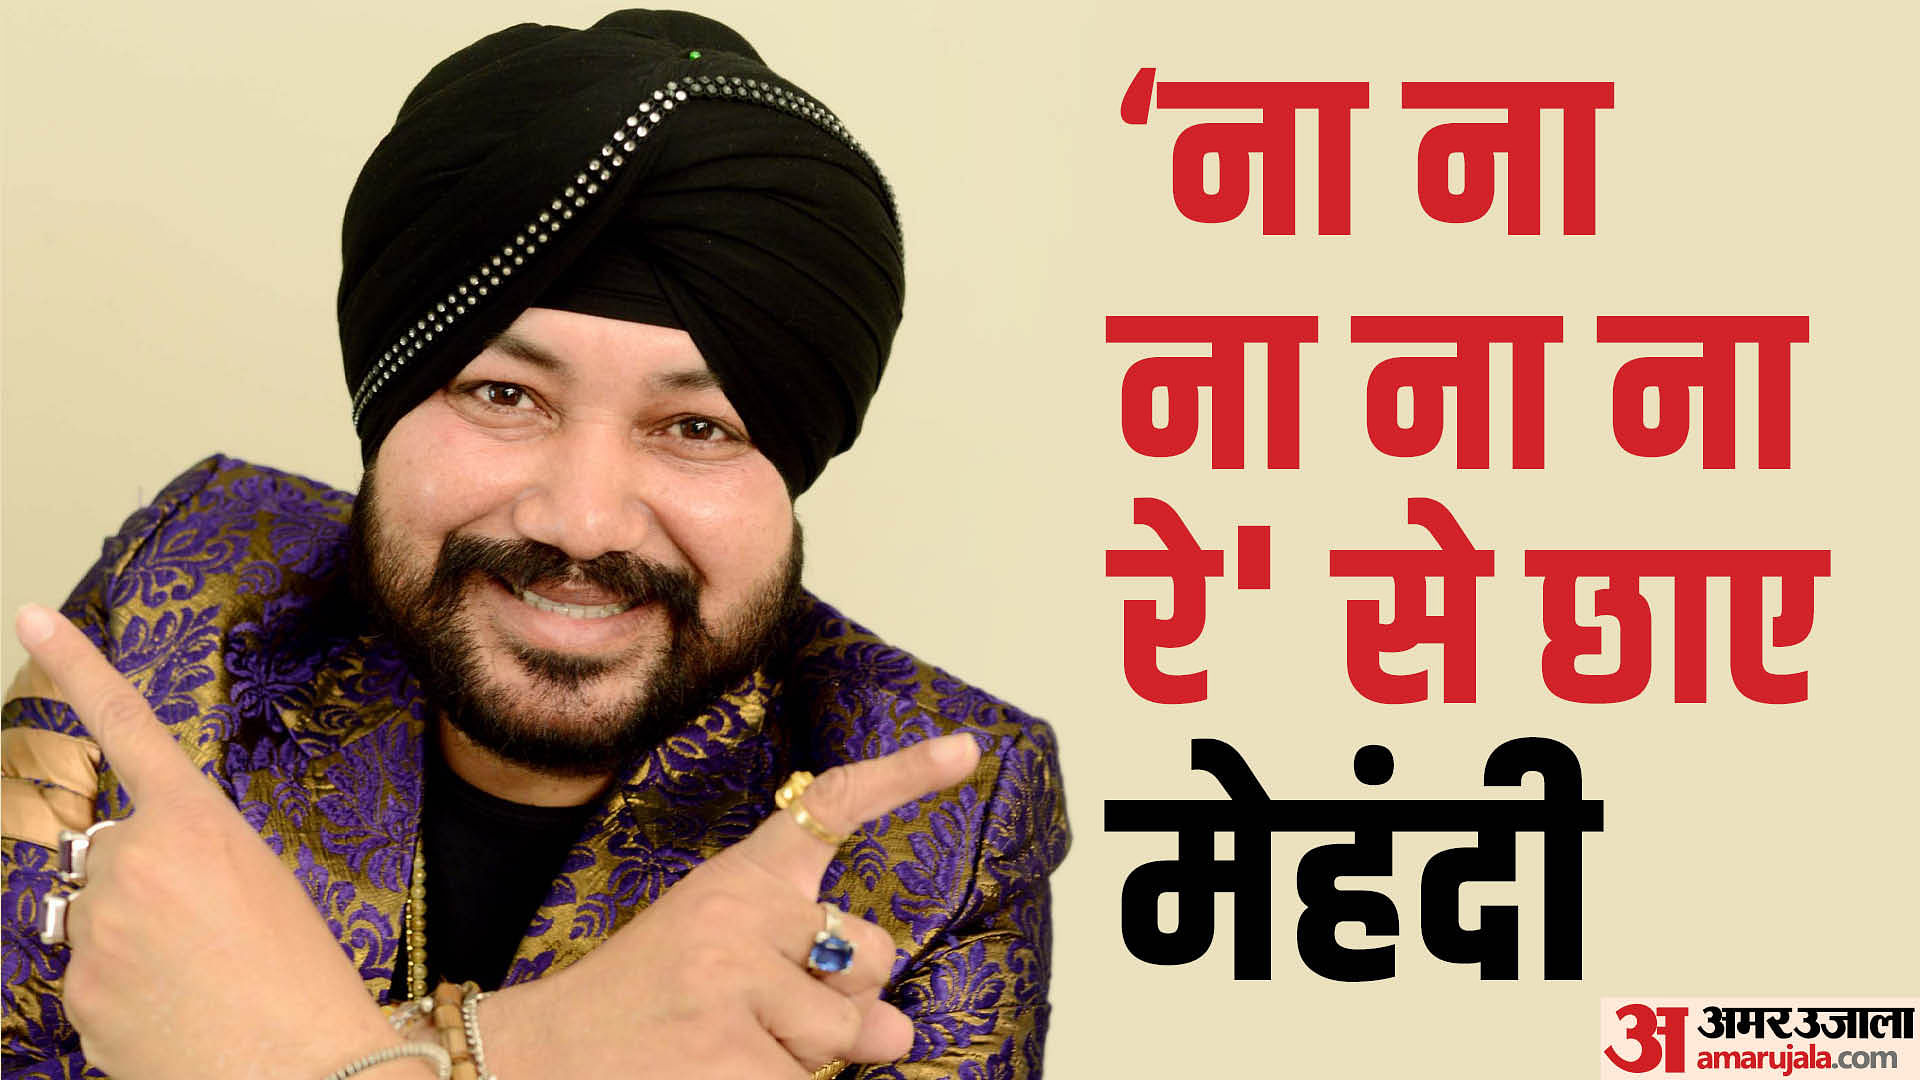 Daler Mehndi says he asks producers to pay ' ₹6 lakh and GST' upfront for  his songs | Bollywood - Hindustan Times